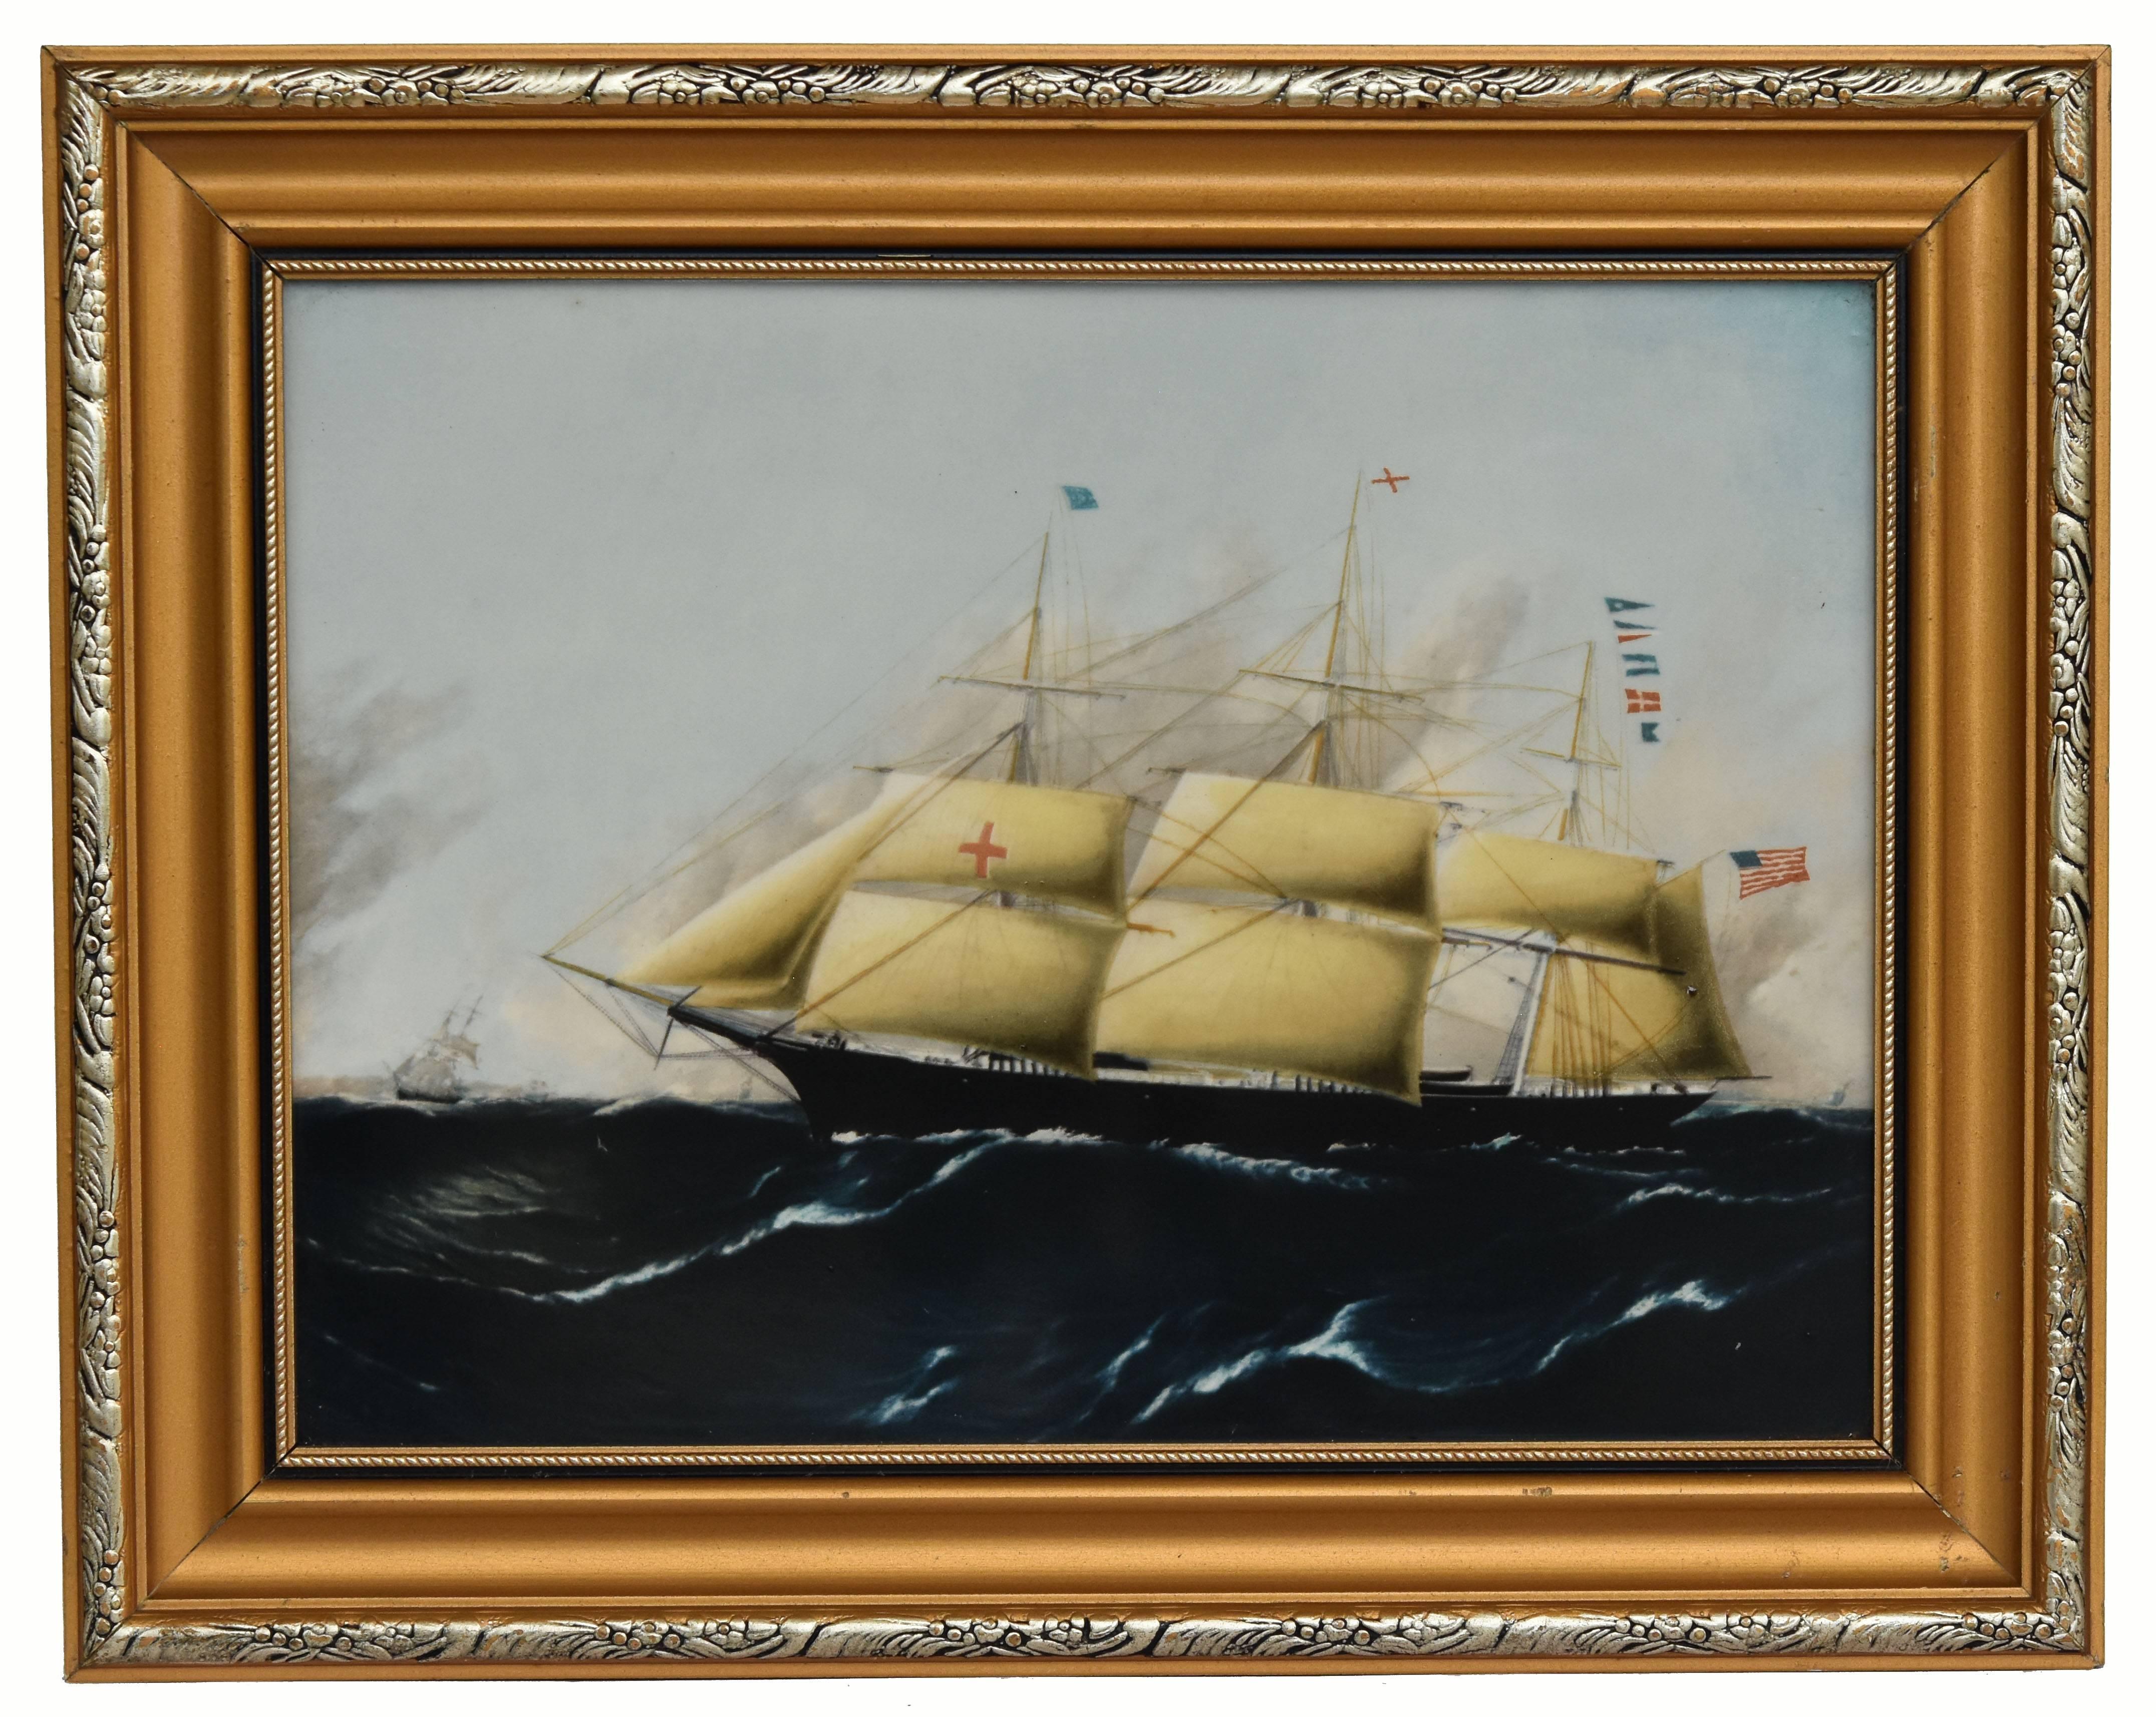 Clipper Ships of America after Original Painting Nautical Sailing Framed Plaques In Excellent Condition For Sale In London, United Kindgom